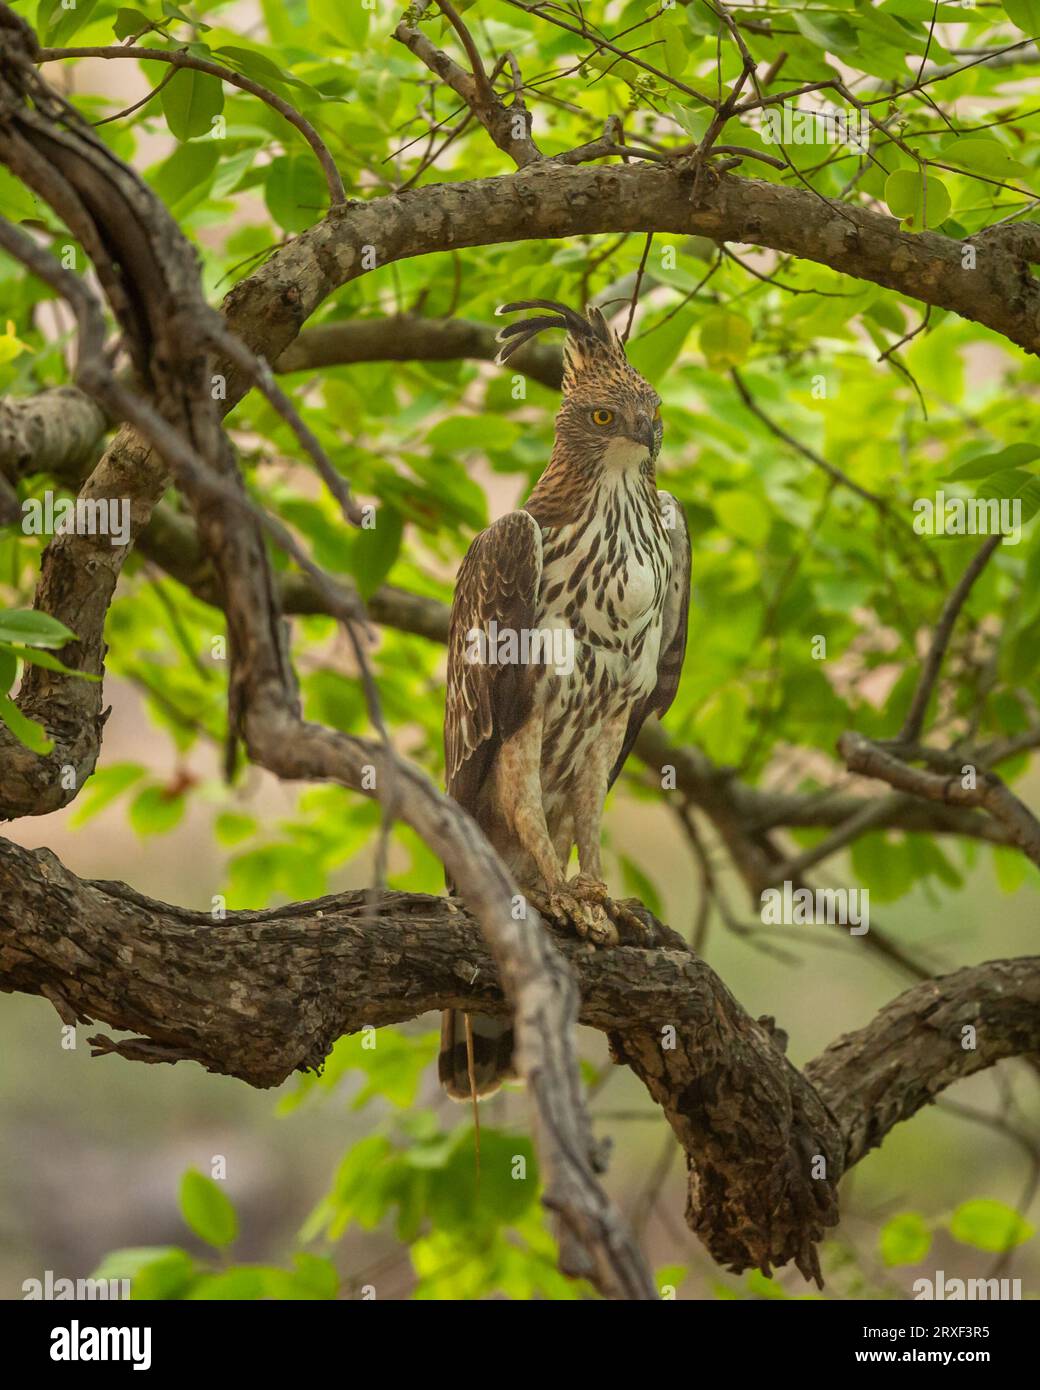 changeable or crested hawk eagle or nisaetus cirrhatus closeup perched on tree in natural green background at bandhavgarh national park tiger reserve Stock Photo